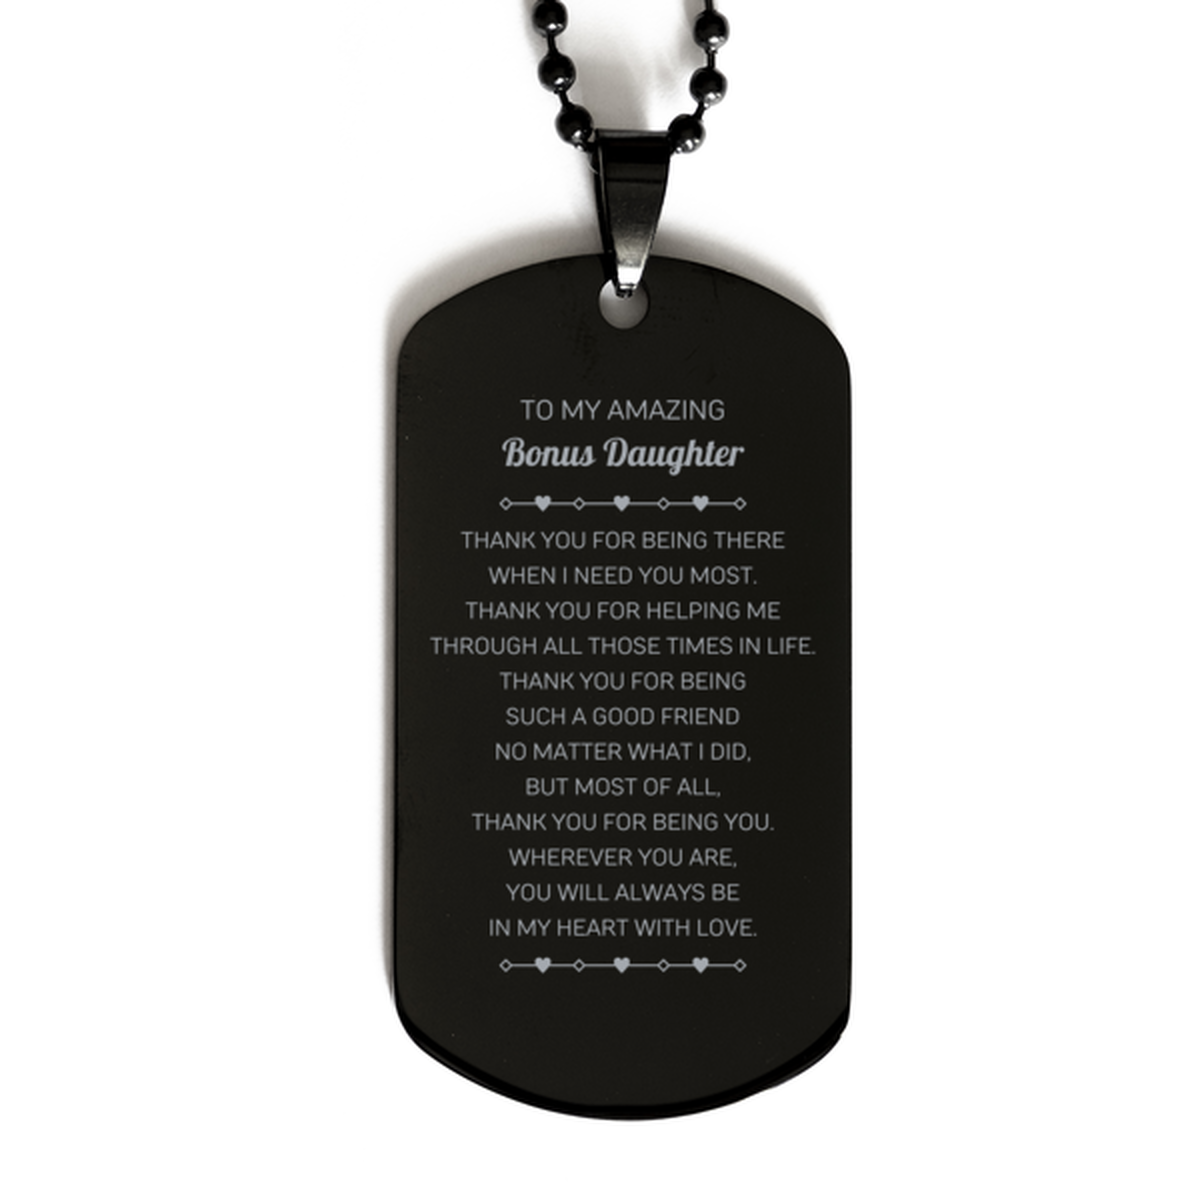 To My Amazing Bonus Daughter Black Dog Tag, Thank you for being there, Thank You Gifts For Bonus Daughter, Birthday, Christmas Unique Gifts For Bonus Daughter